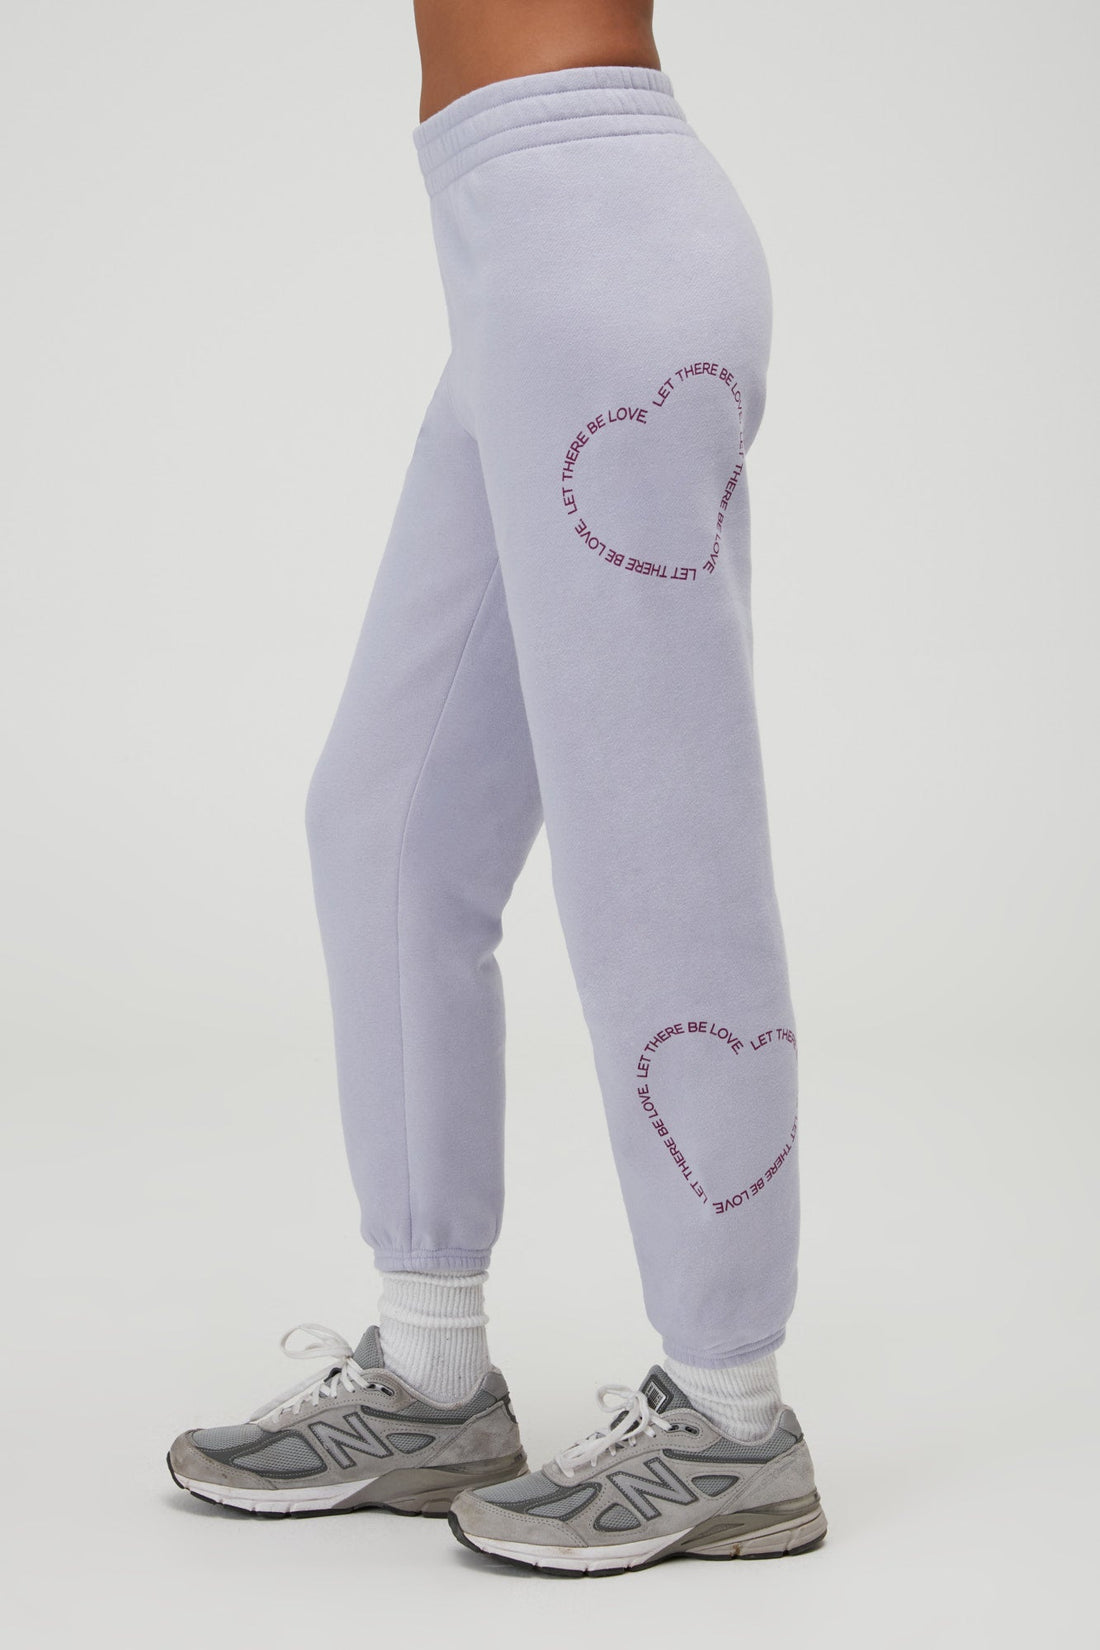 Shop Spiritual Gangster Let There Be Love Boyfriend Sweatpants - Premium Jogger Bottoms from Spiritual Gangster Online now at Spoiled Brat 